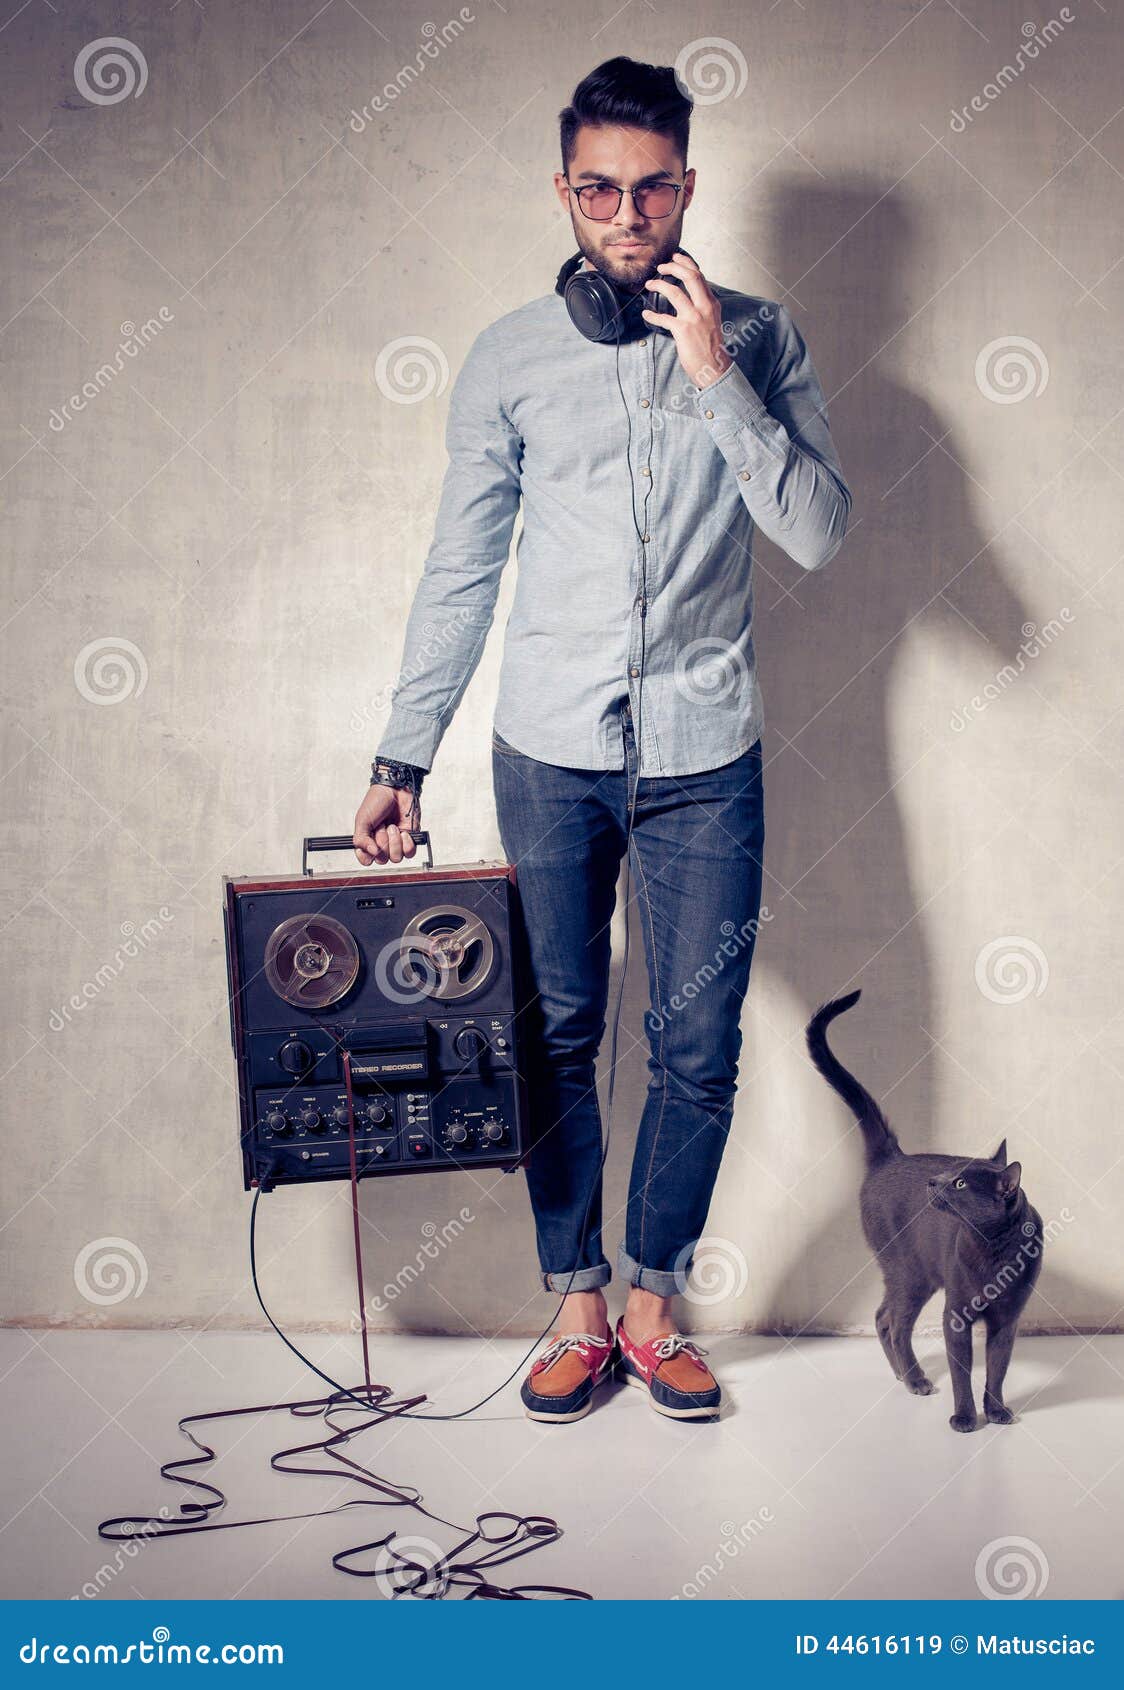 Handsome man and cat listening to music on a magnetophone against grunge wall